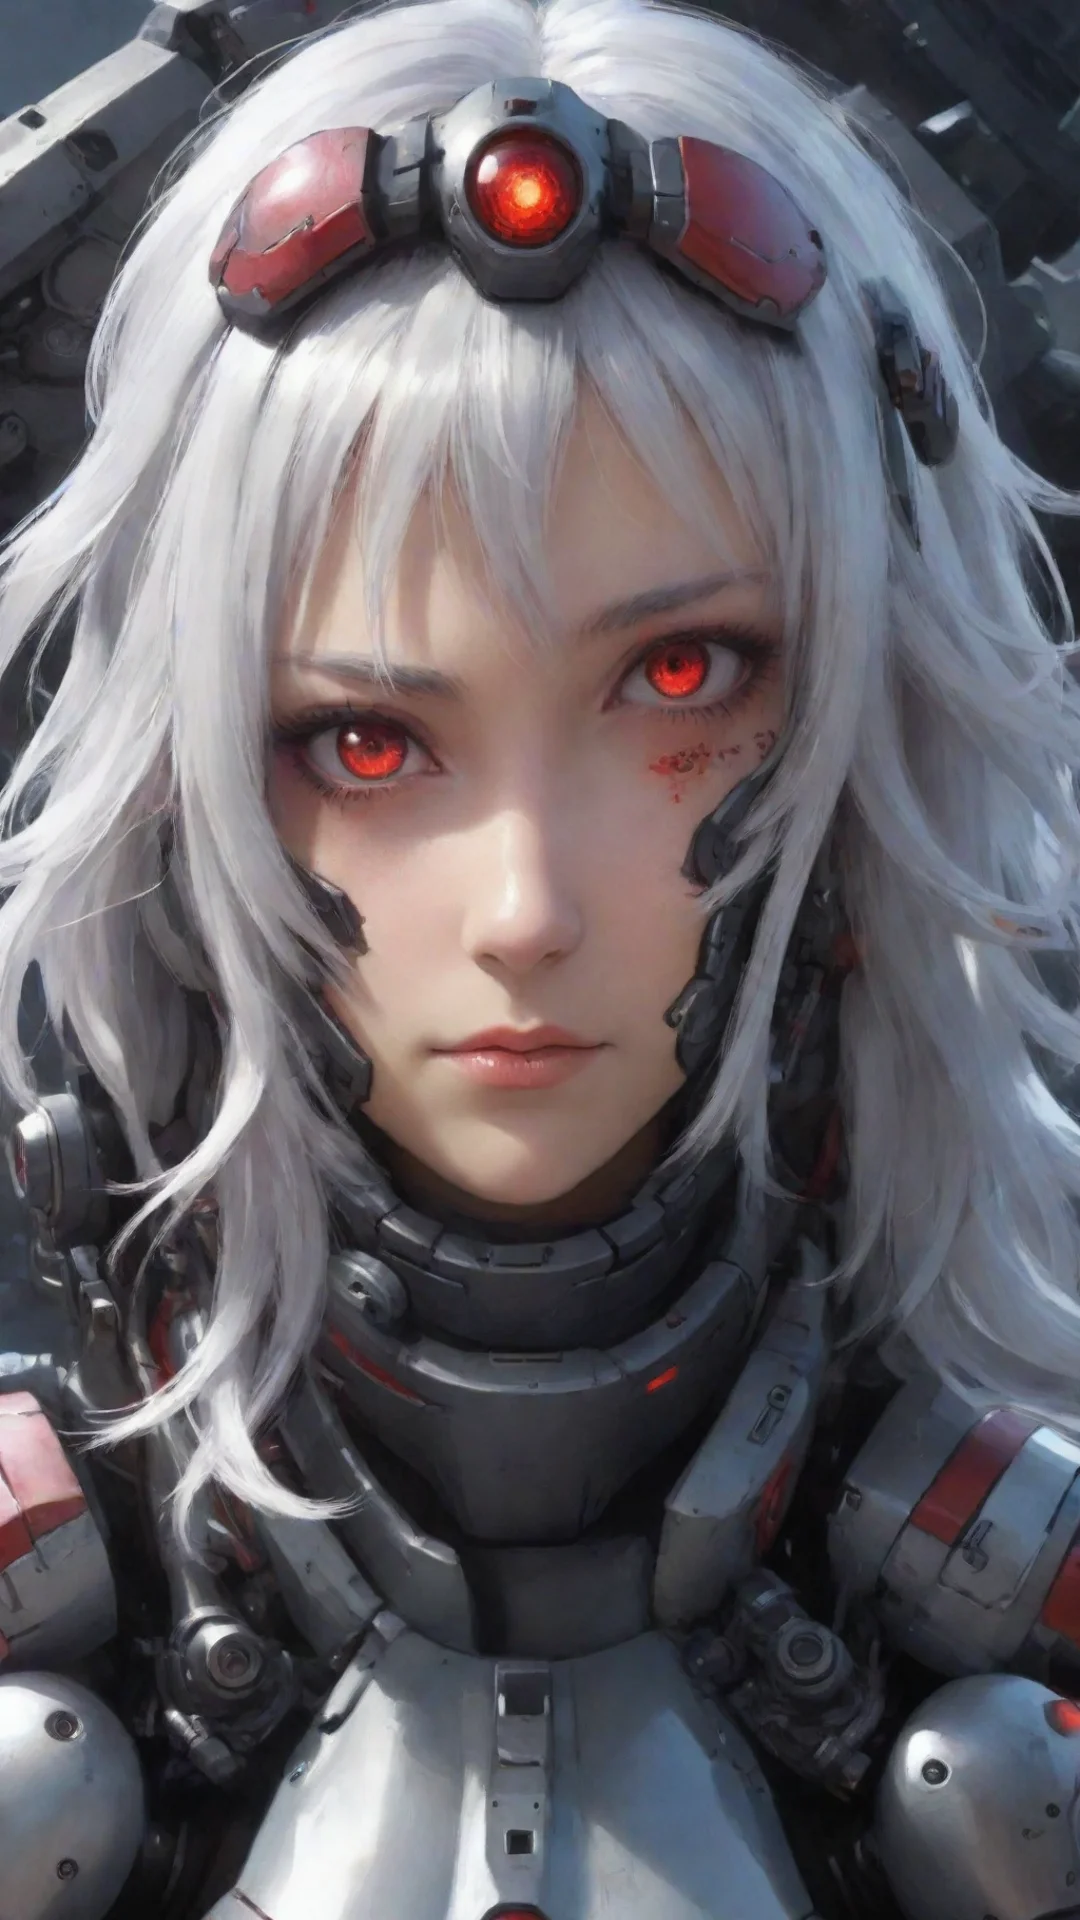 aiamazing mecha pilot girl crimson eyes silver hair spaceship background awesome portrait 2 tall